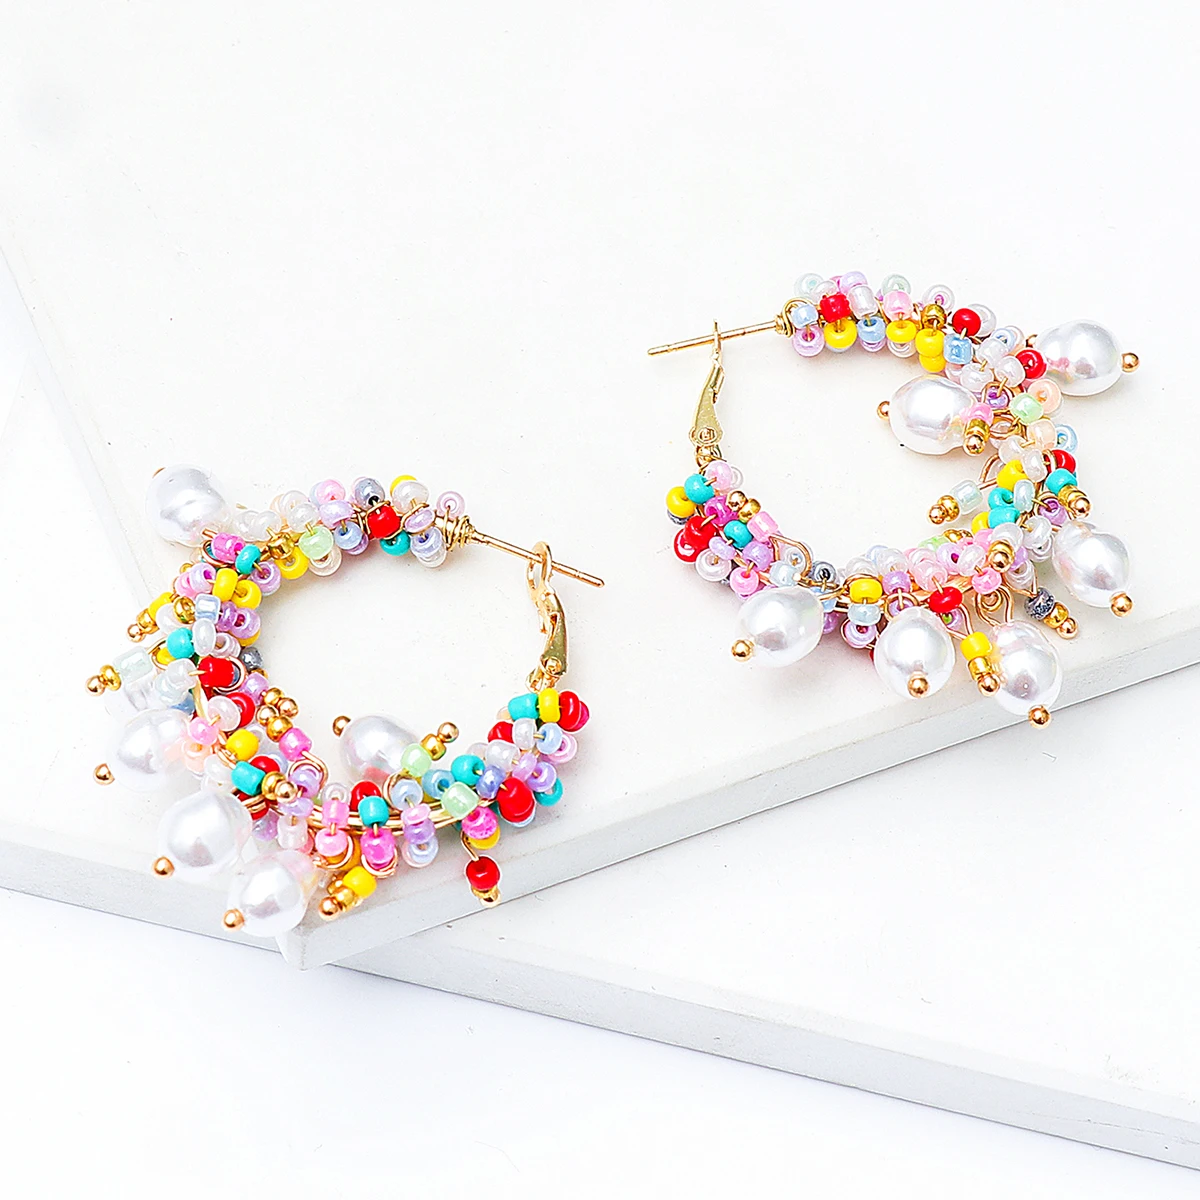 

JURAN New Bohemia Colorful Beads Pearls Charms Exaggerated Big Circle Hoop Earrings for Women Girls Fashion Jewelry Party Gift